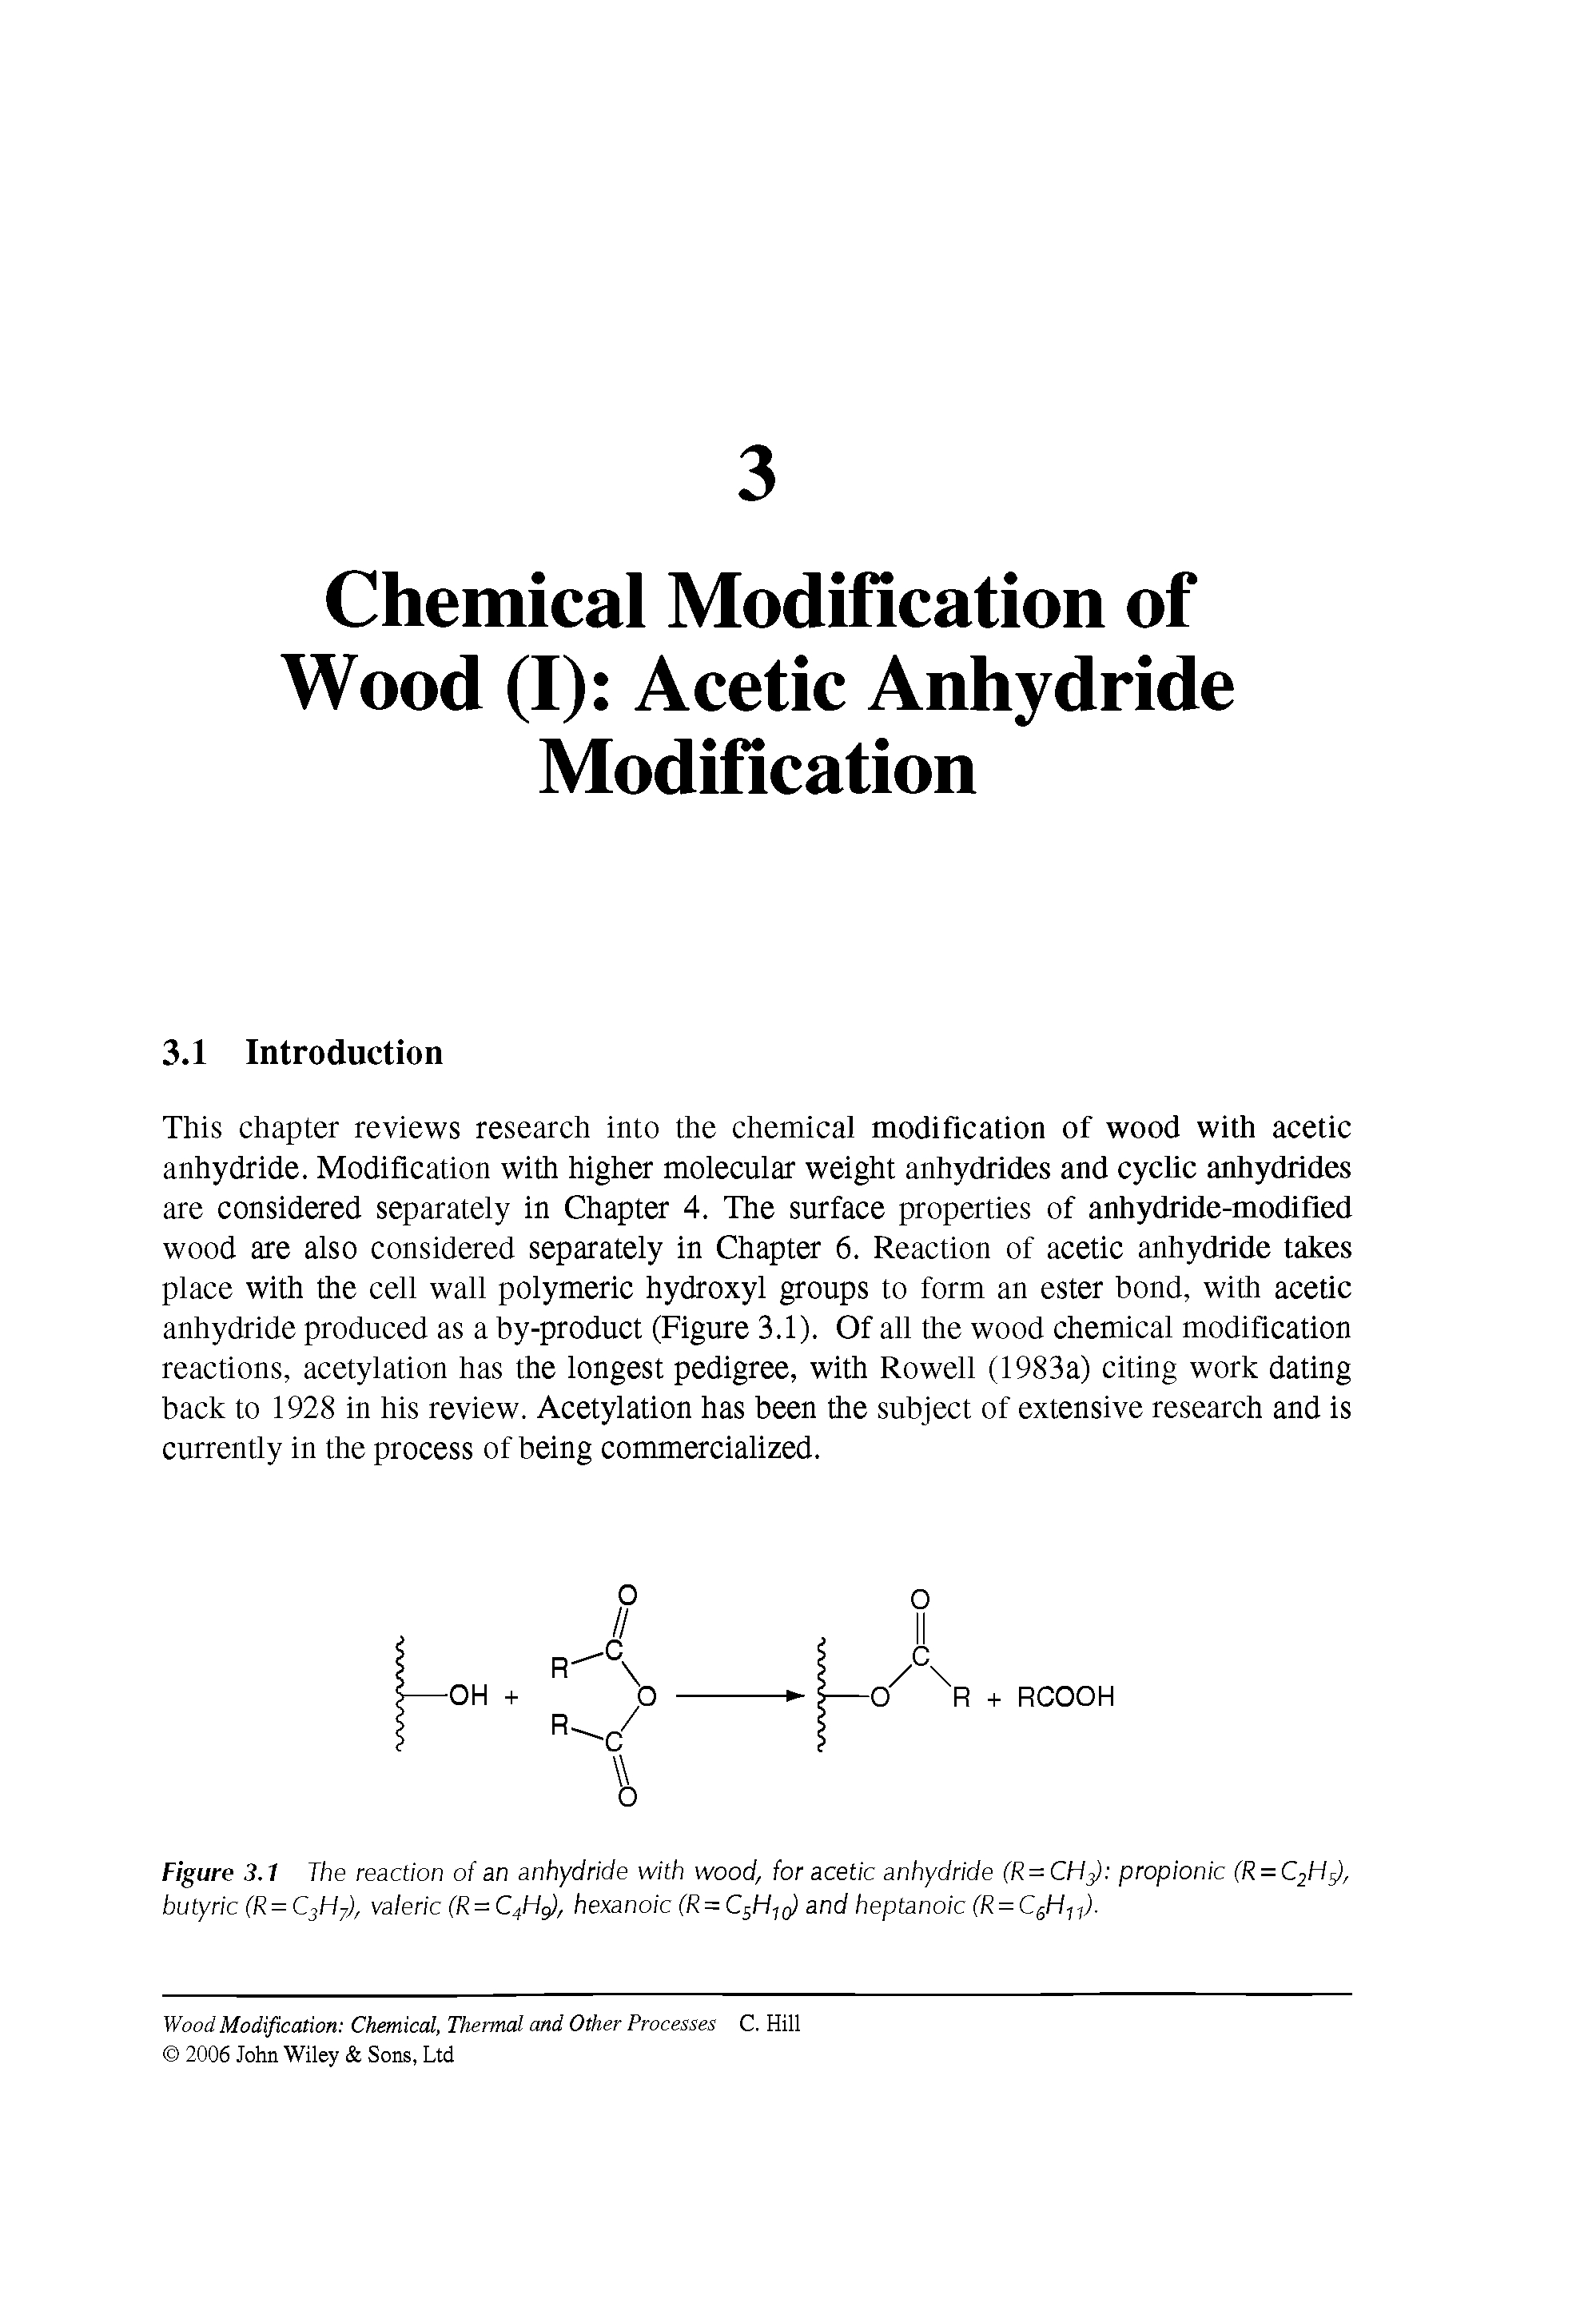 Figure 3.1 The reaction of an anhydride with wood, for acetic anhydride (R = CHj) propionic (R = C2Hs), butyric (R = C2Hj), valeric (R = C4H, hexanoic (R = C H-iq) and heptanoic (R = CgH-j ).